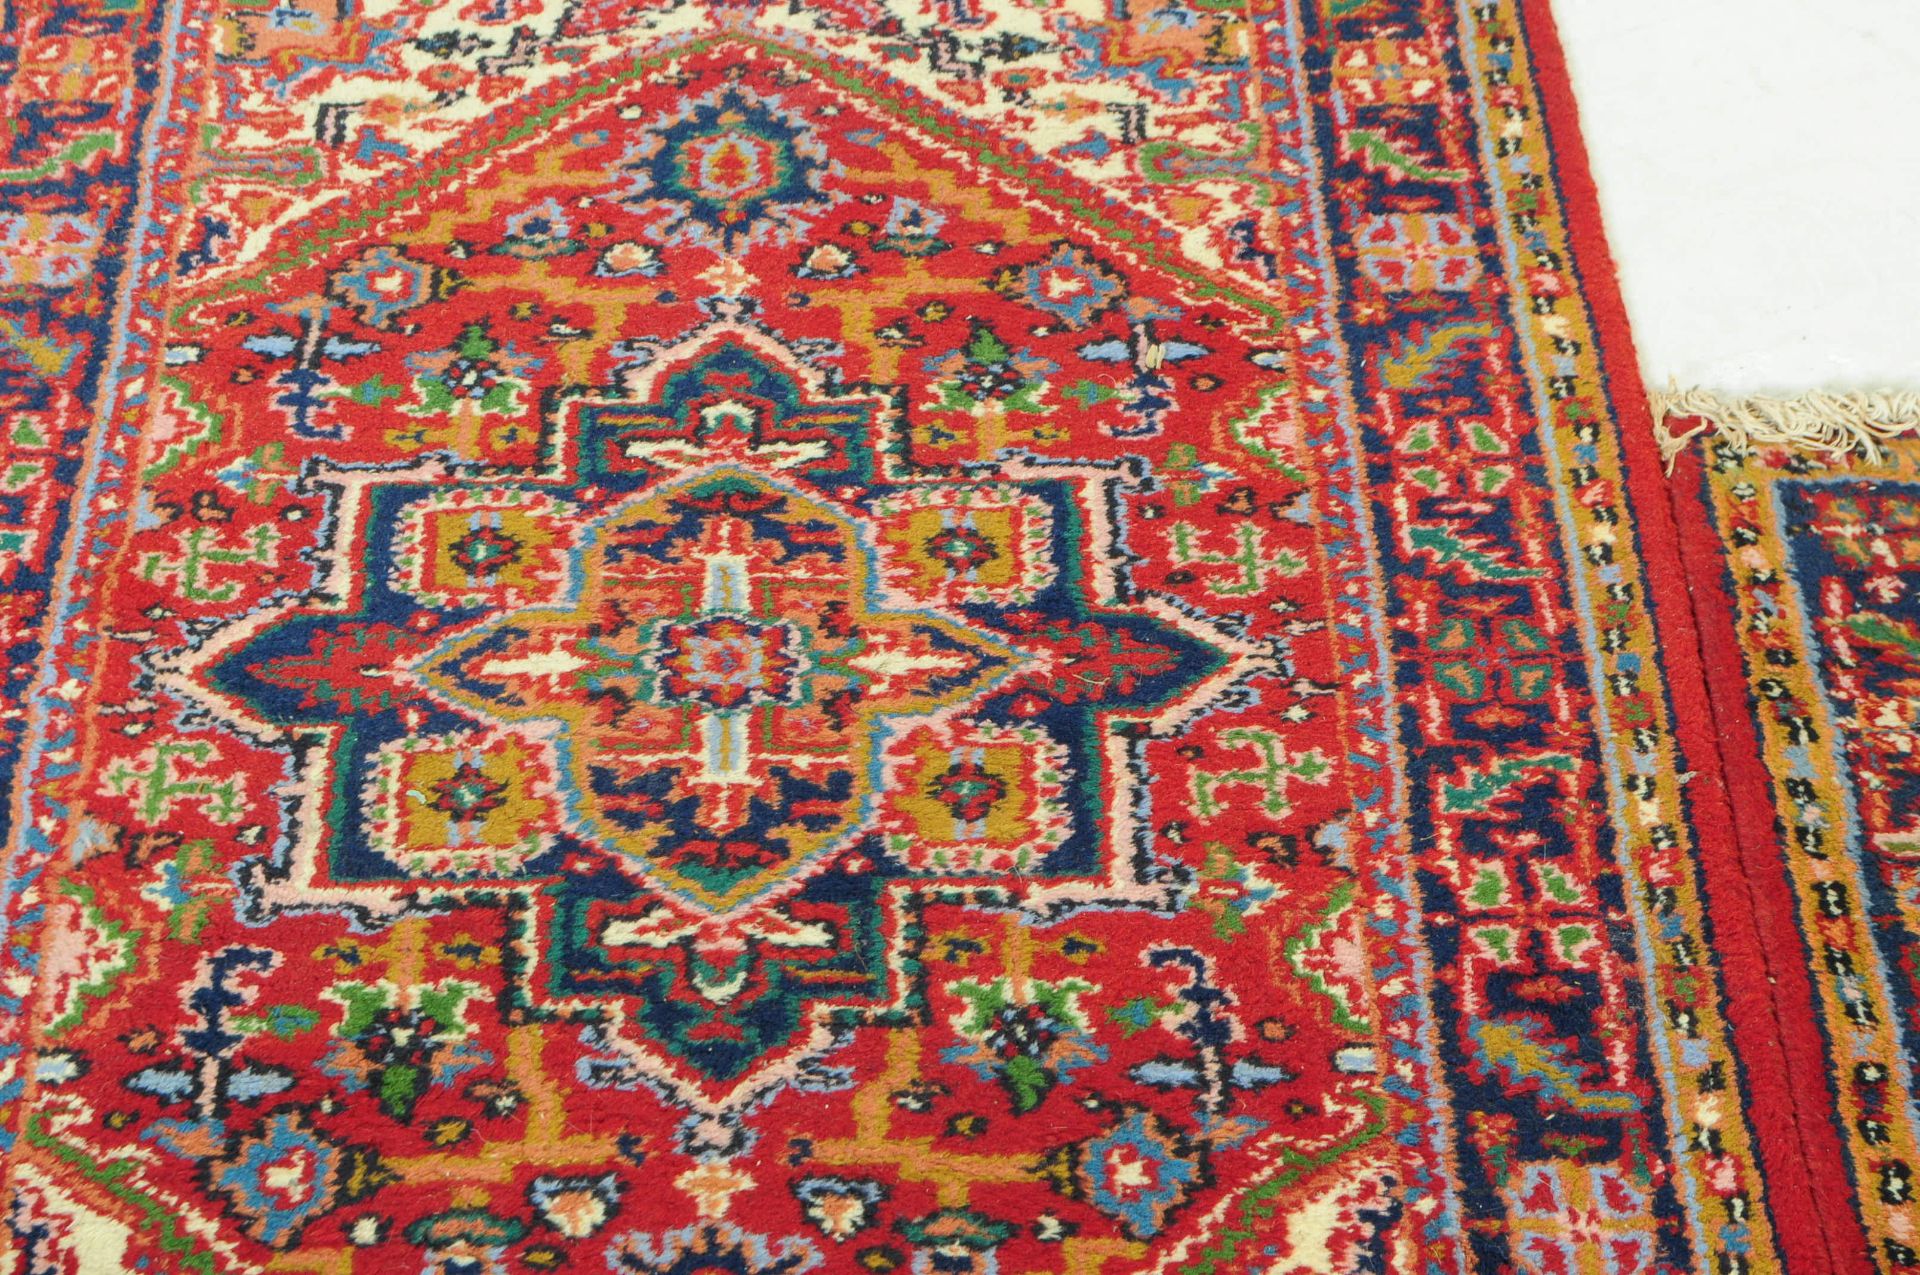 TWO LATE 20TH CENTURY PERSIAN MANNER WOOL RUGS - Image 3 of 4